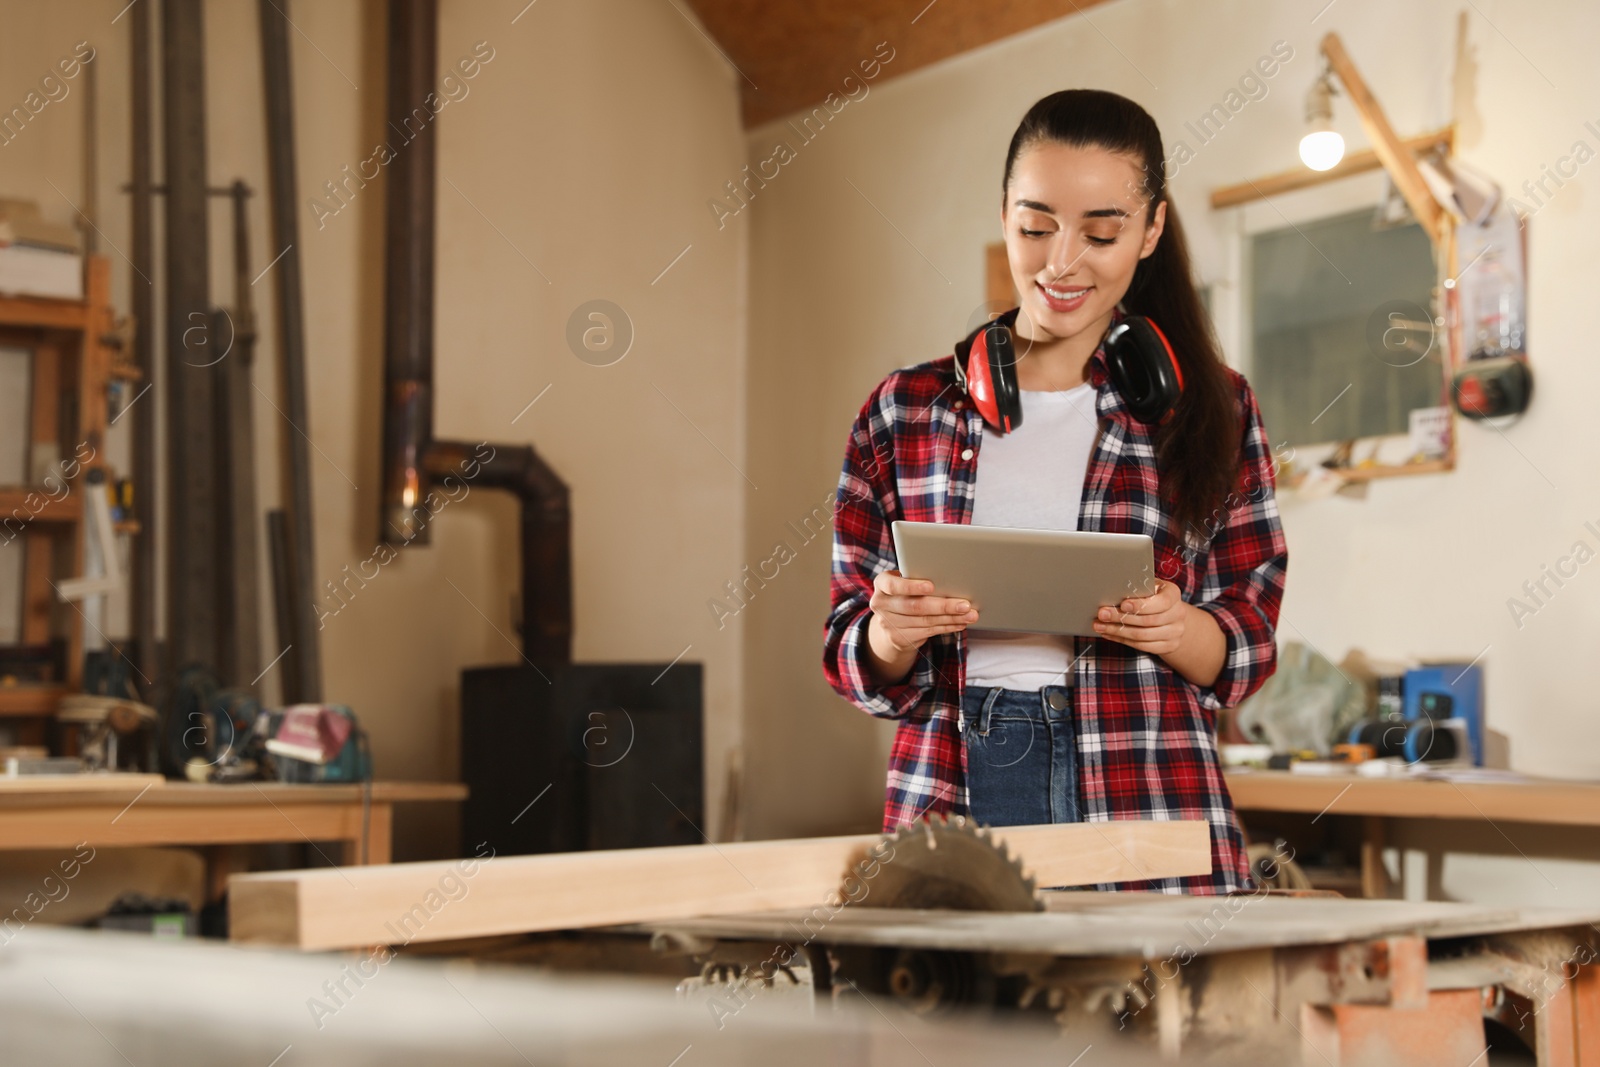 Photo of Professional carpenter with tablet near sawmill machine in workshop